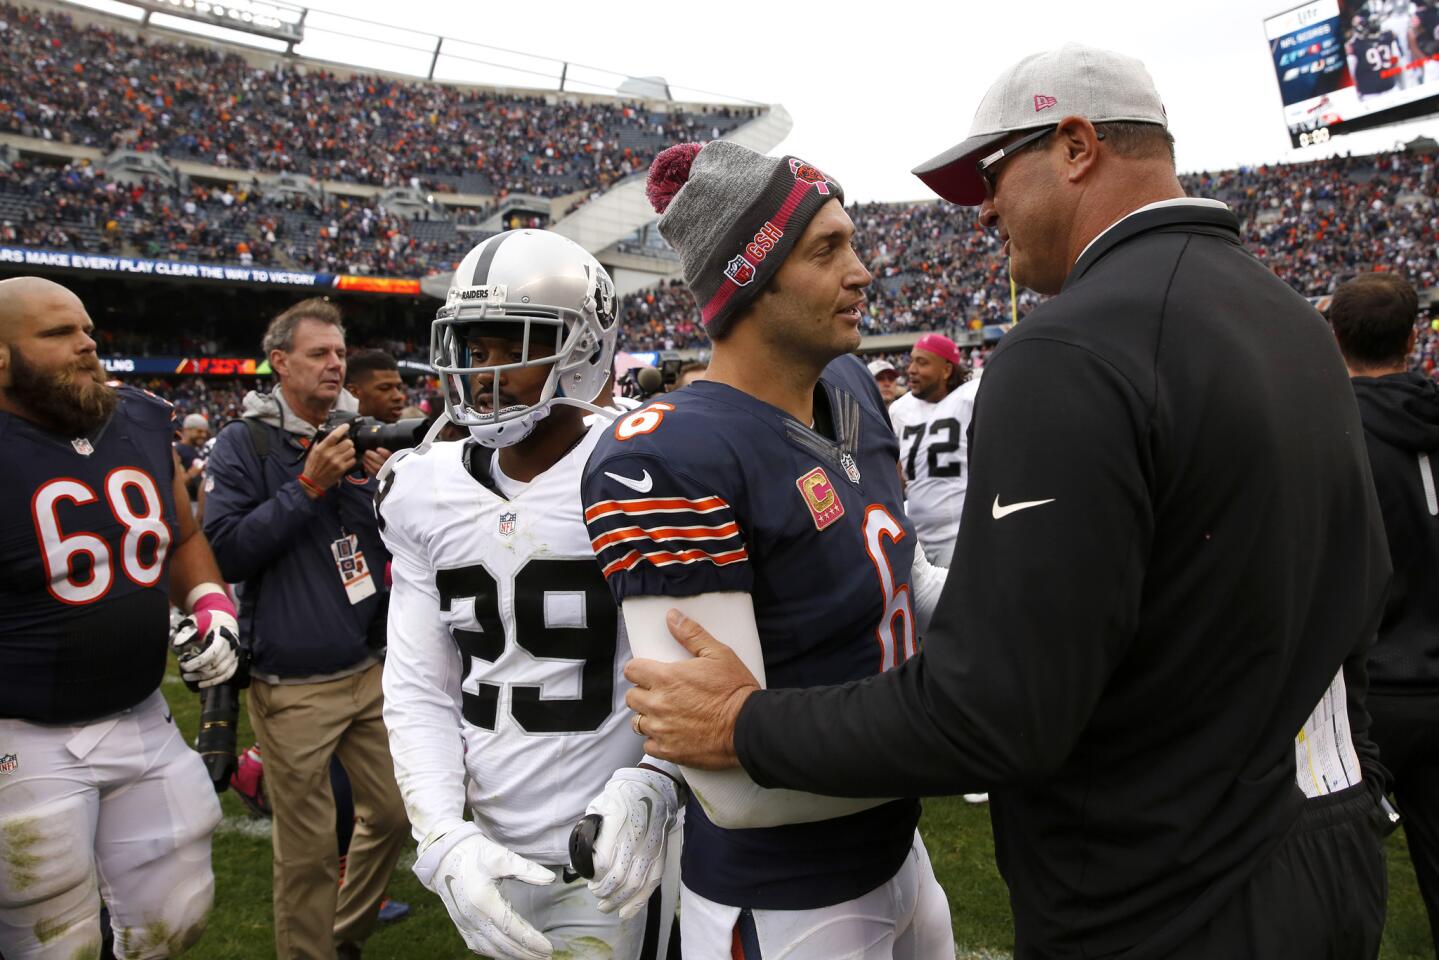 Jay Cutler chats with former Bears offensive coordinator Mike Tice and Oakland Raiders offensive line coach following a 22-10 Bears win.